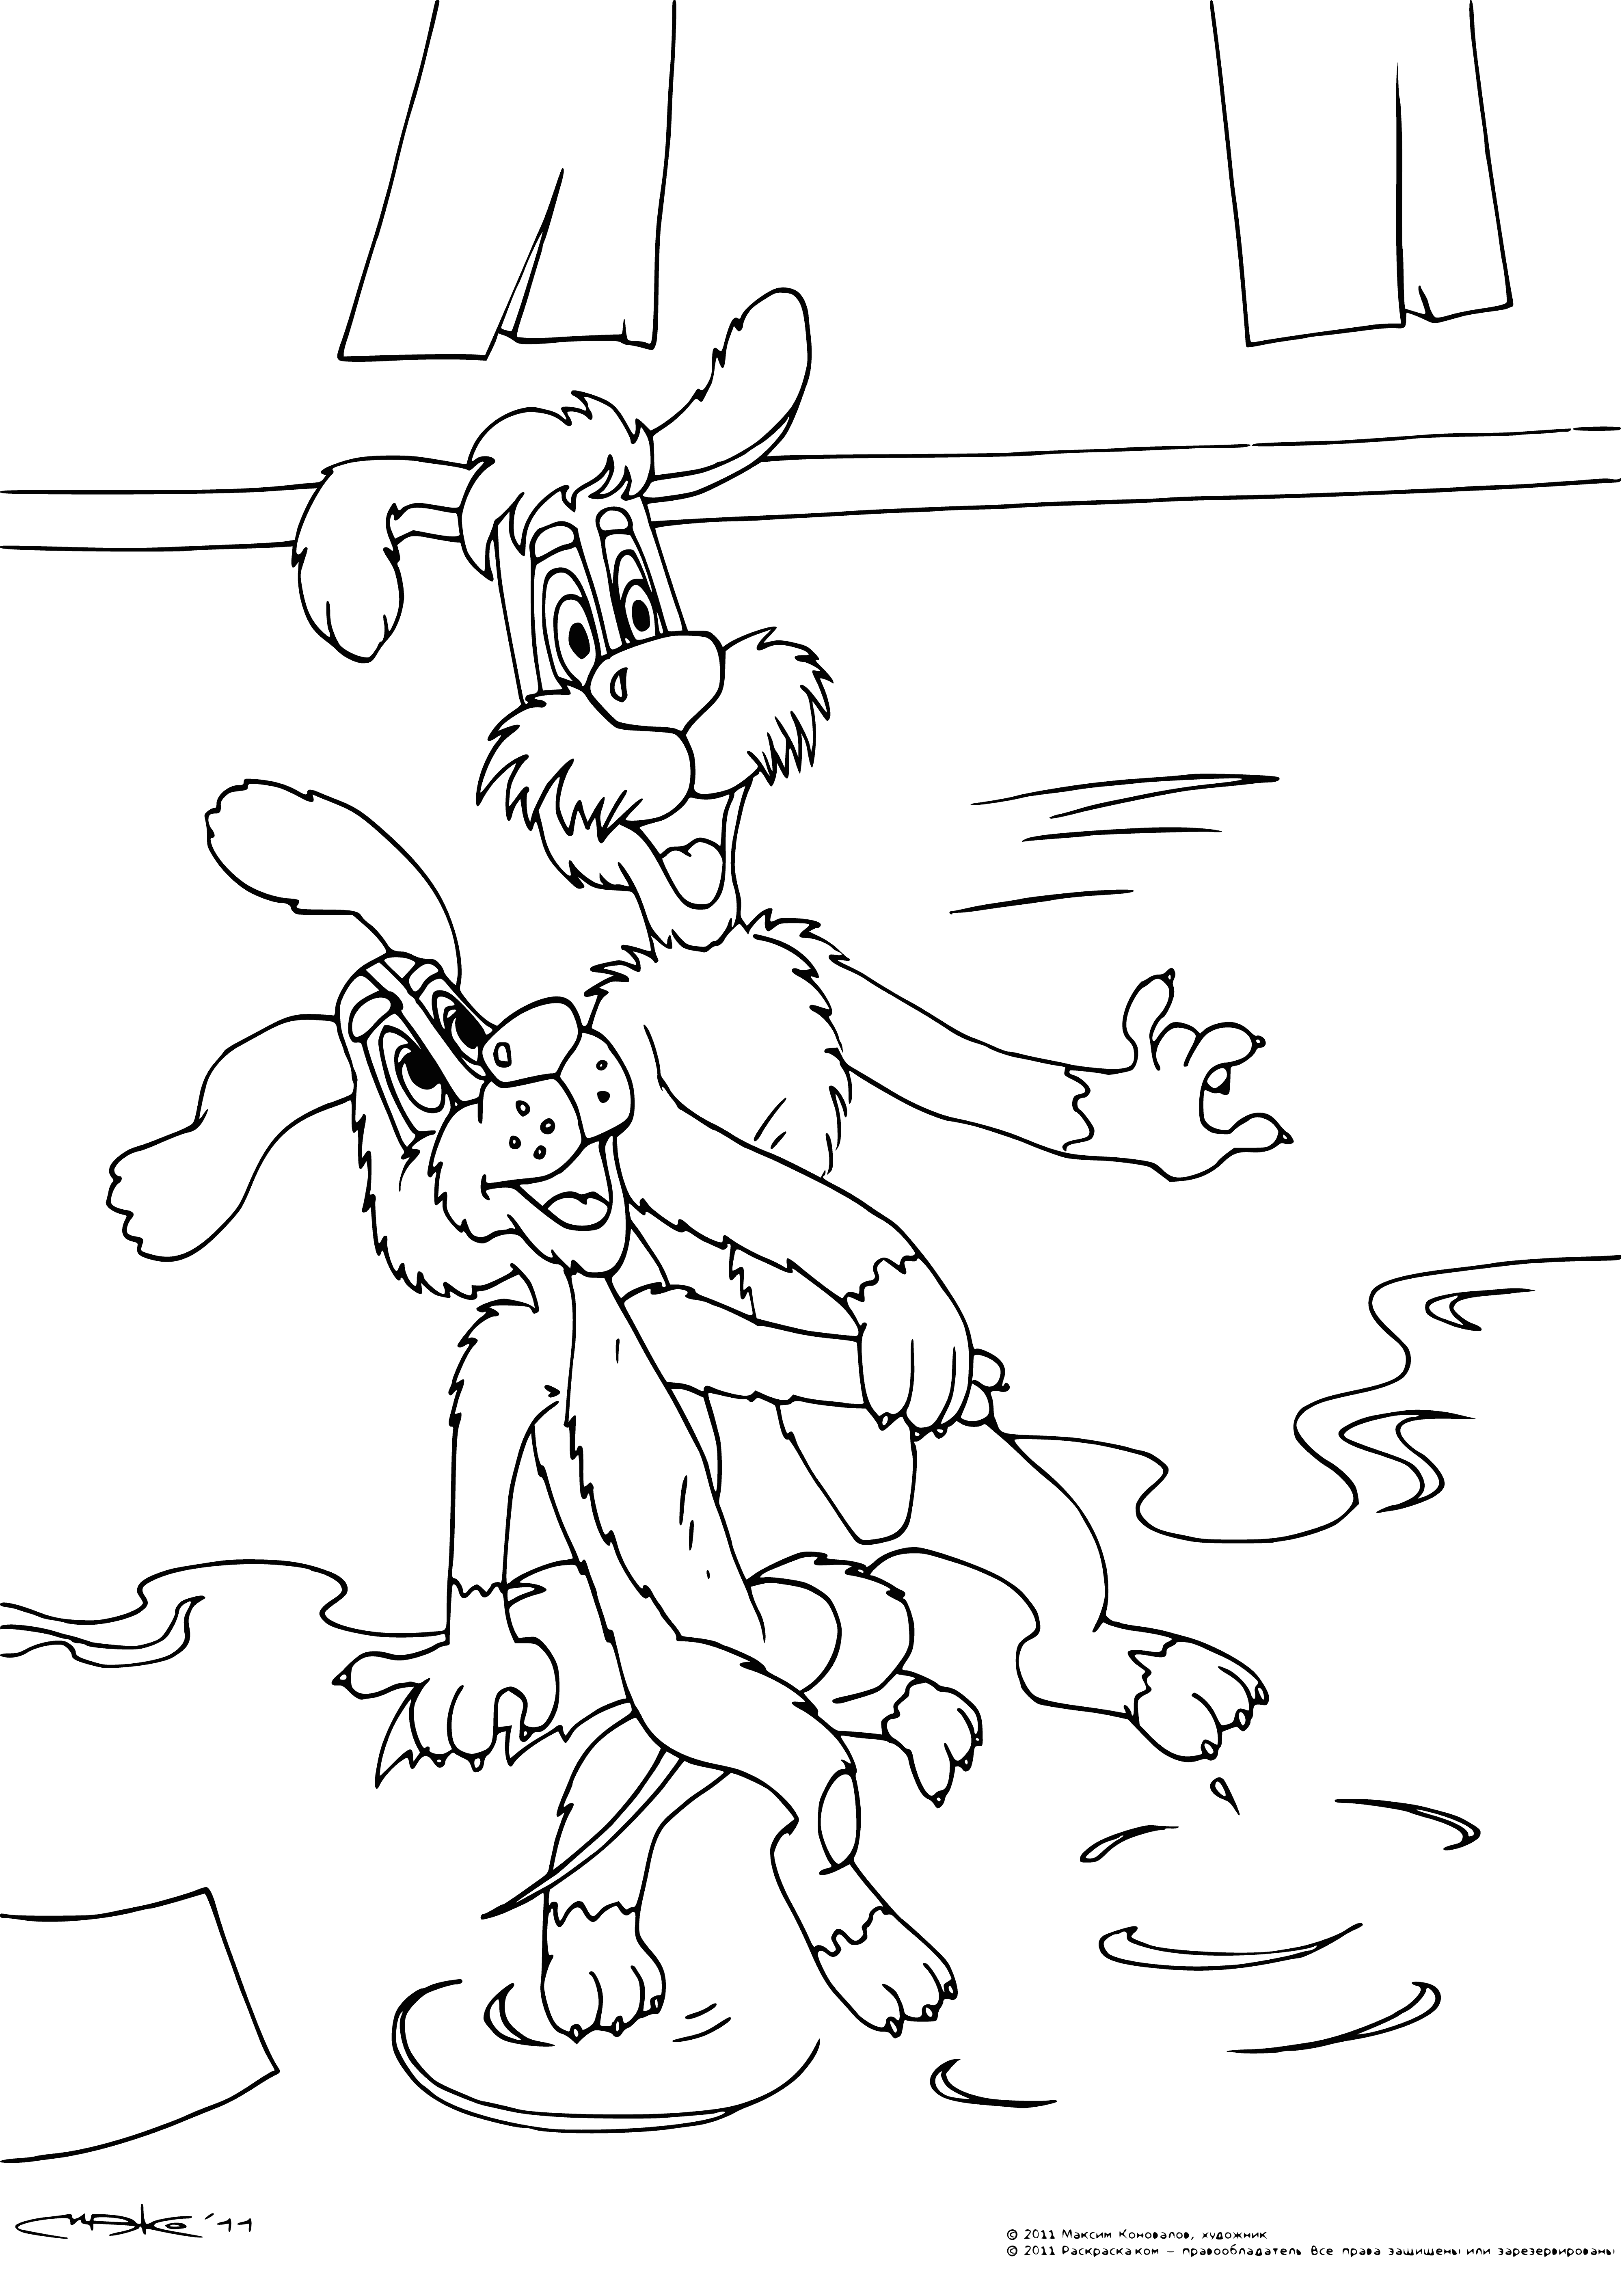 coloring page: Bobik visits his friend Barbos, who is licking spilled jelly from a huge jar; Bobik disapproves.